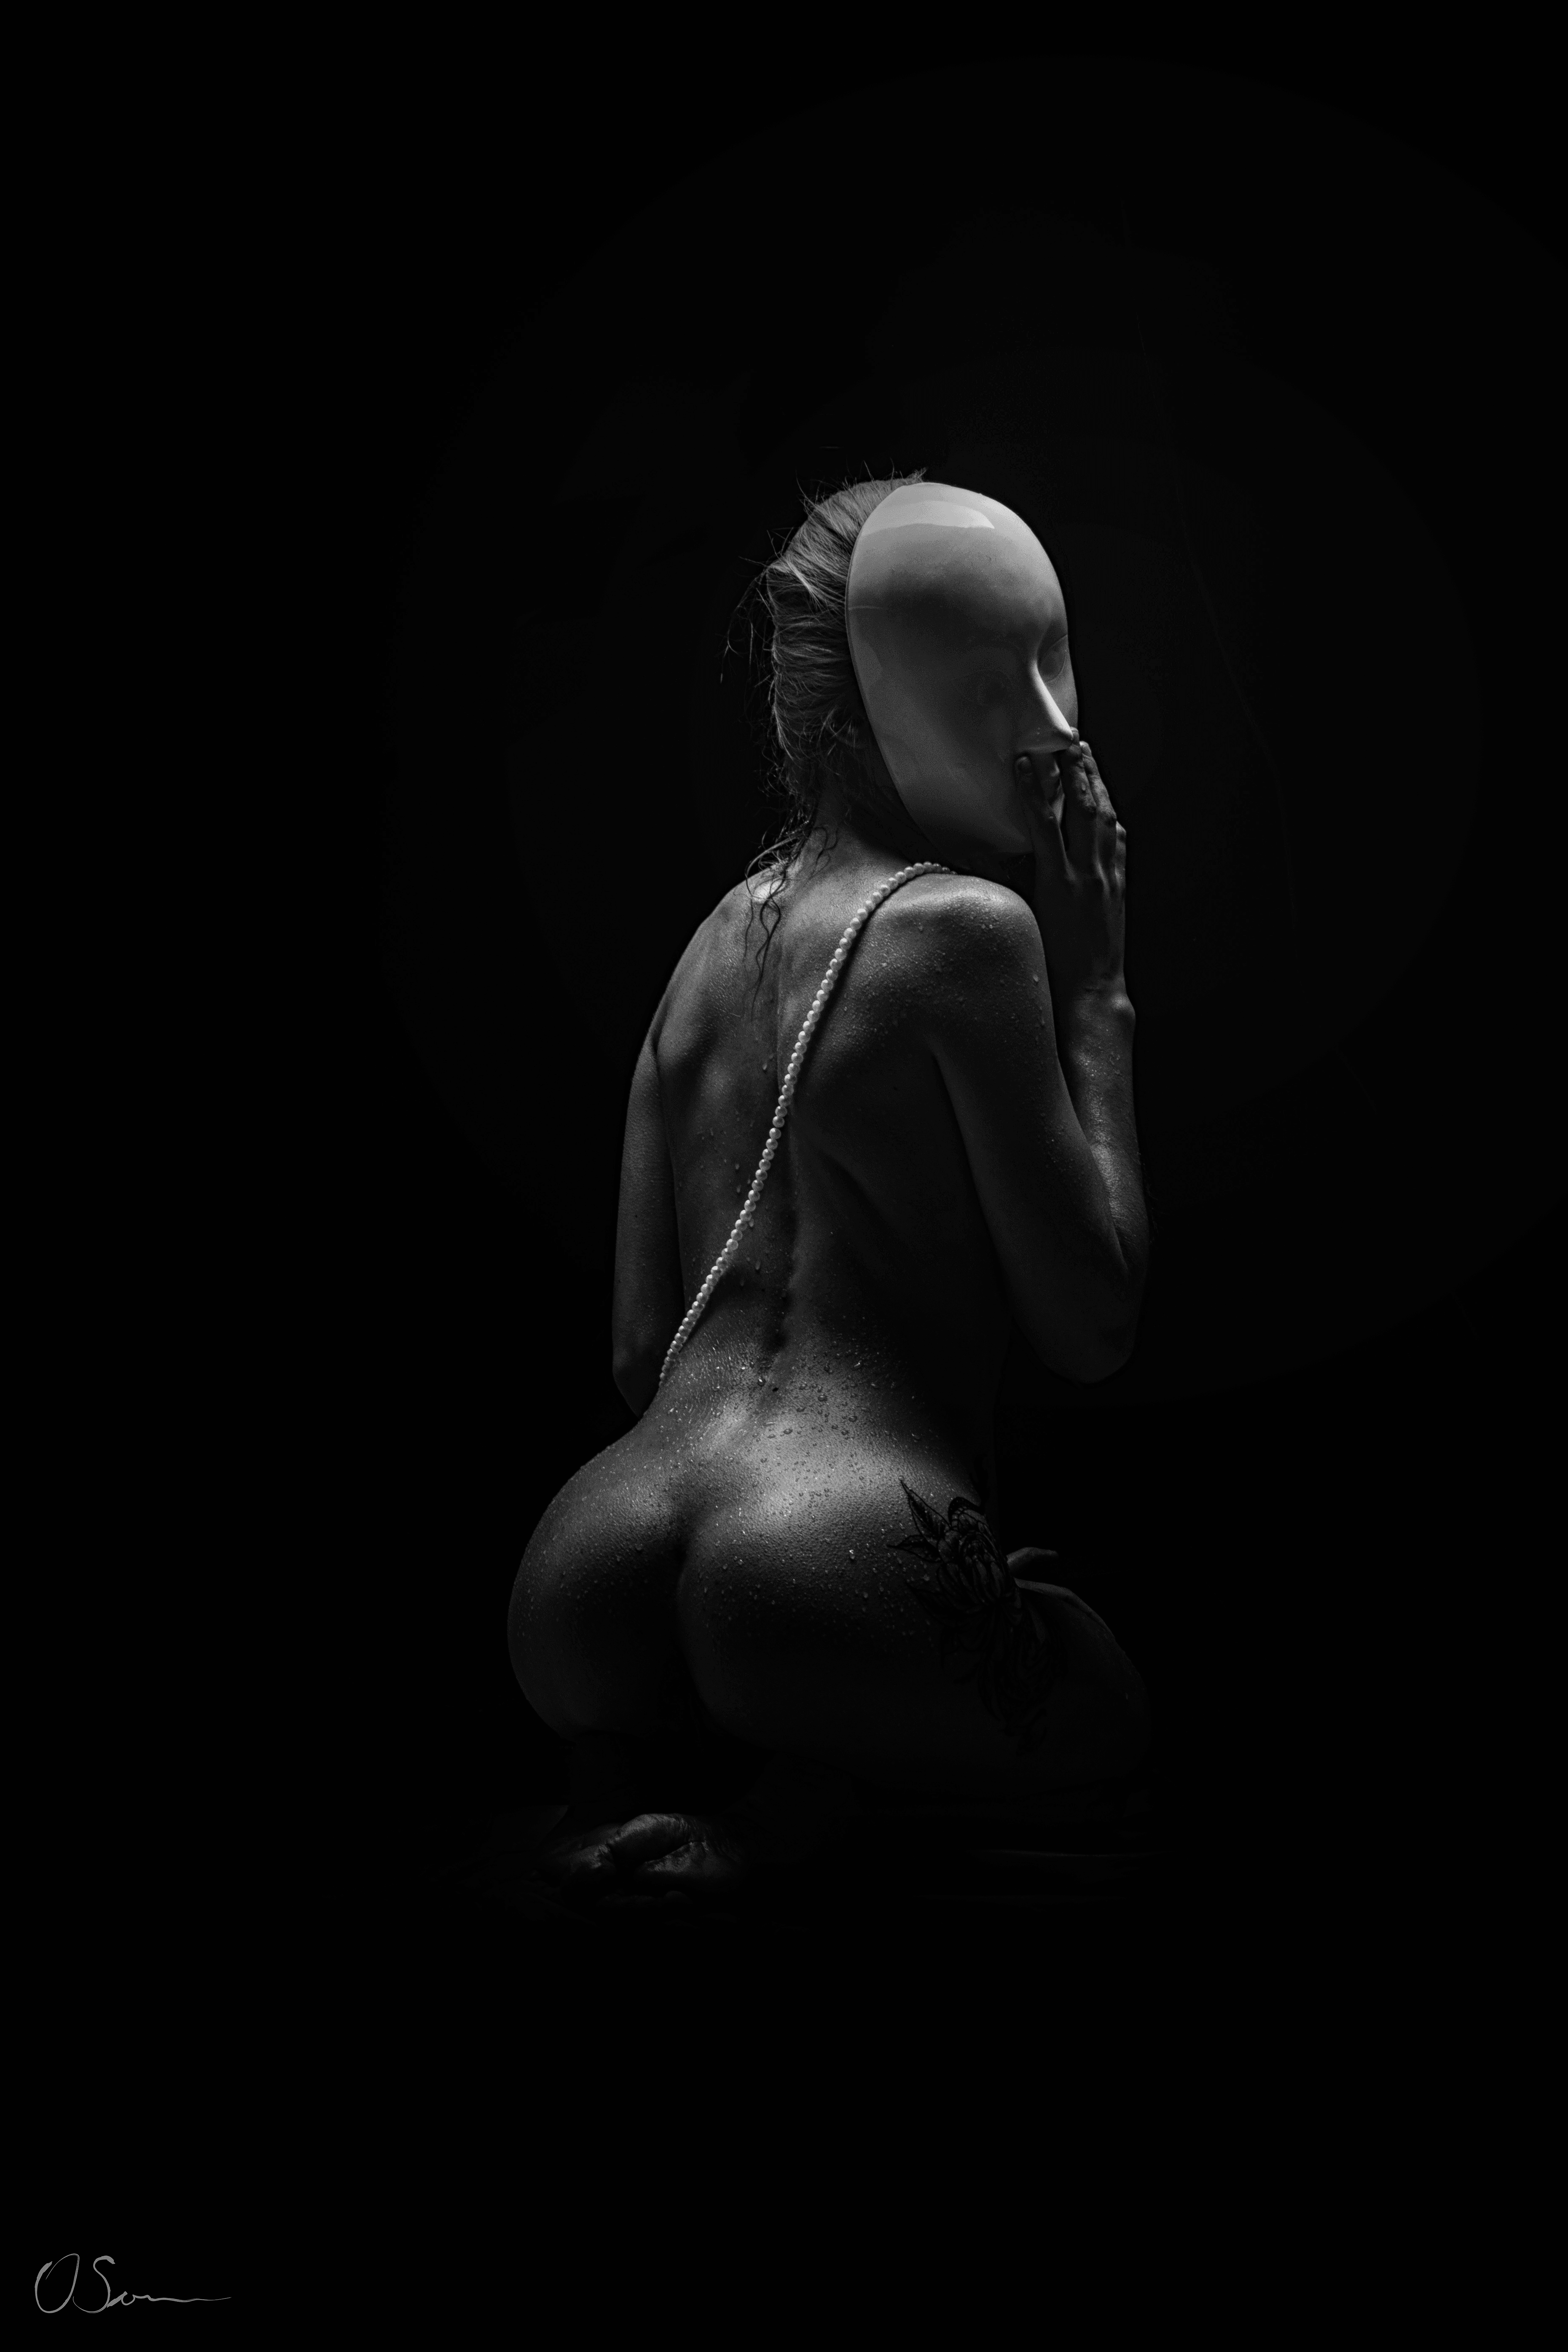 Behind every mask there is a story | nude art photography